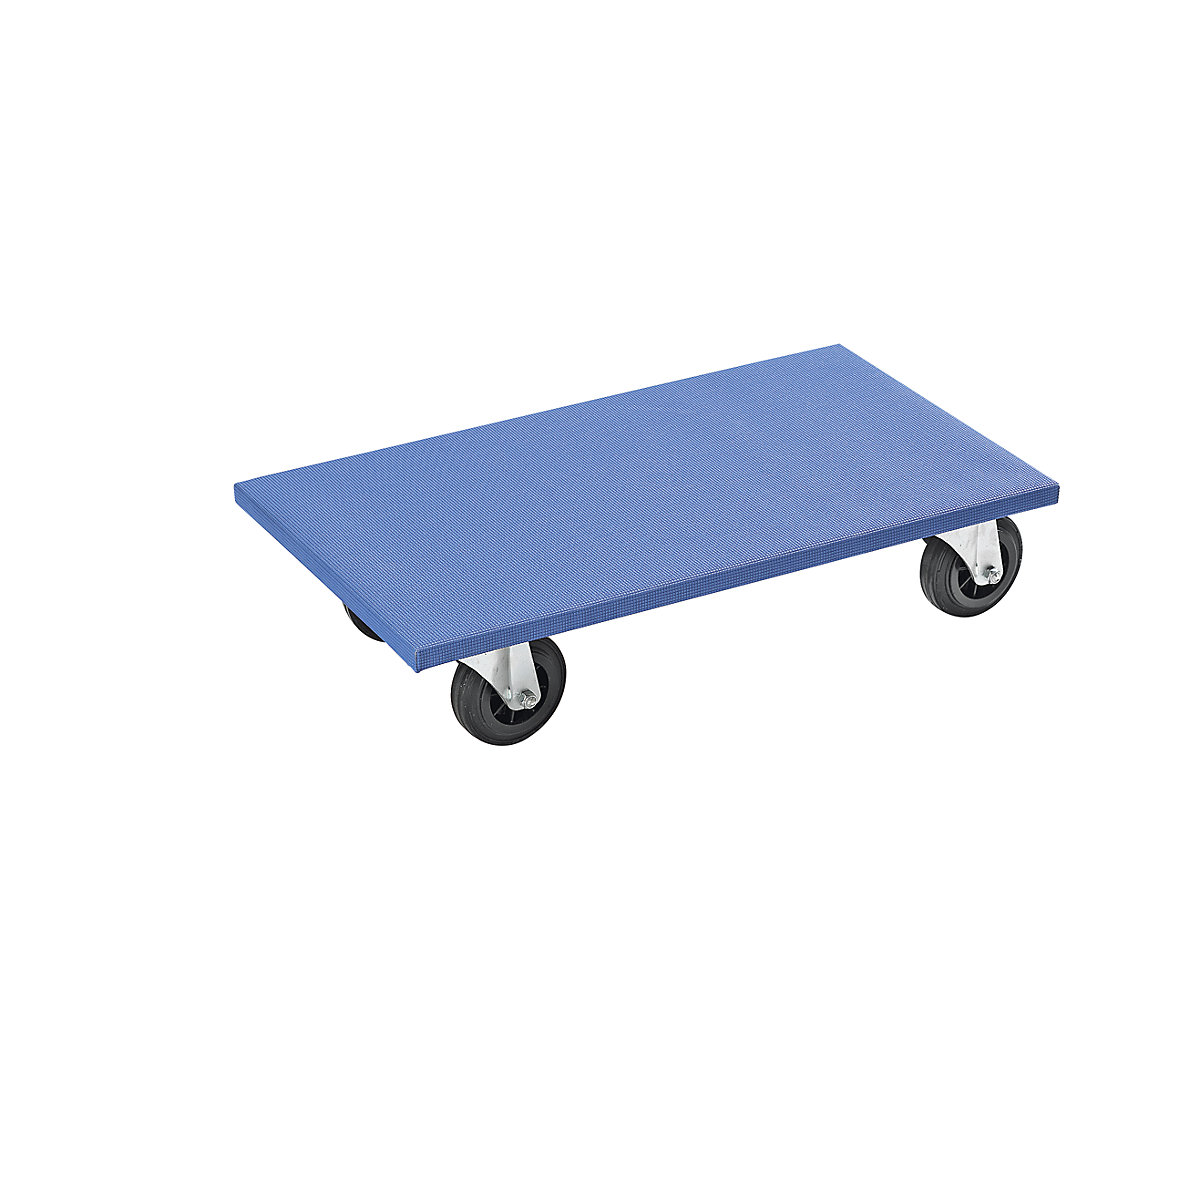 Furniture dolly, LxWxH 600 x 350 x 145 mm, pack of 2, max. load 300 kg, 2+ packs-5